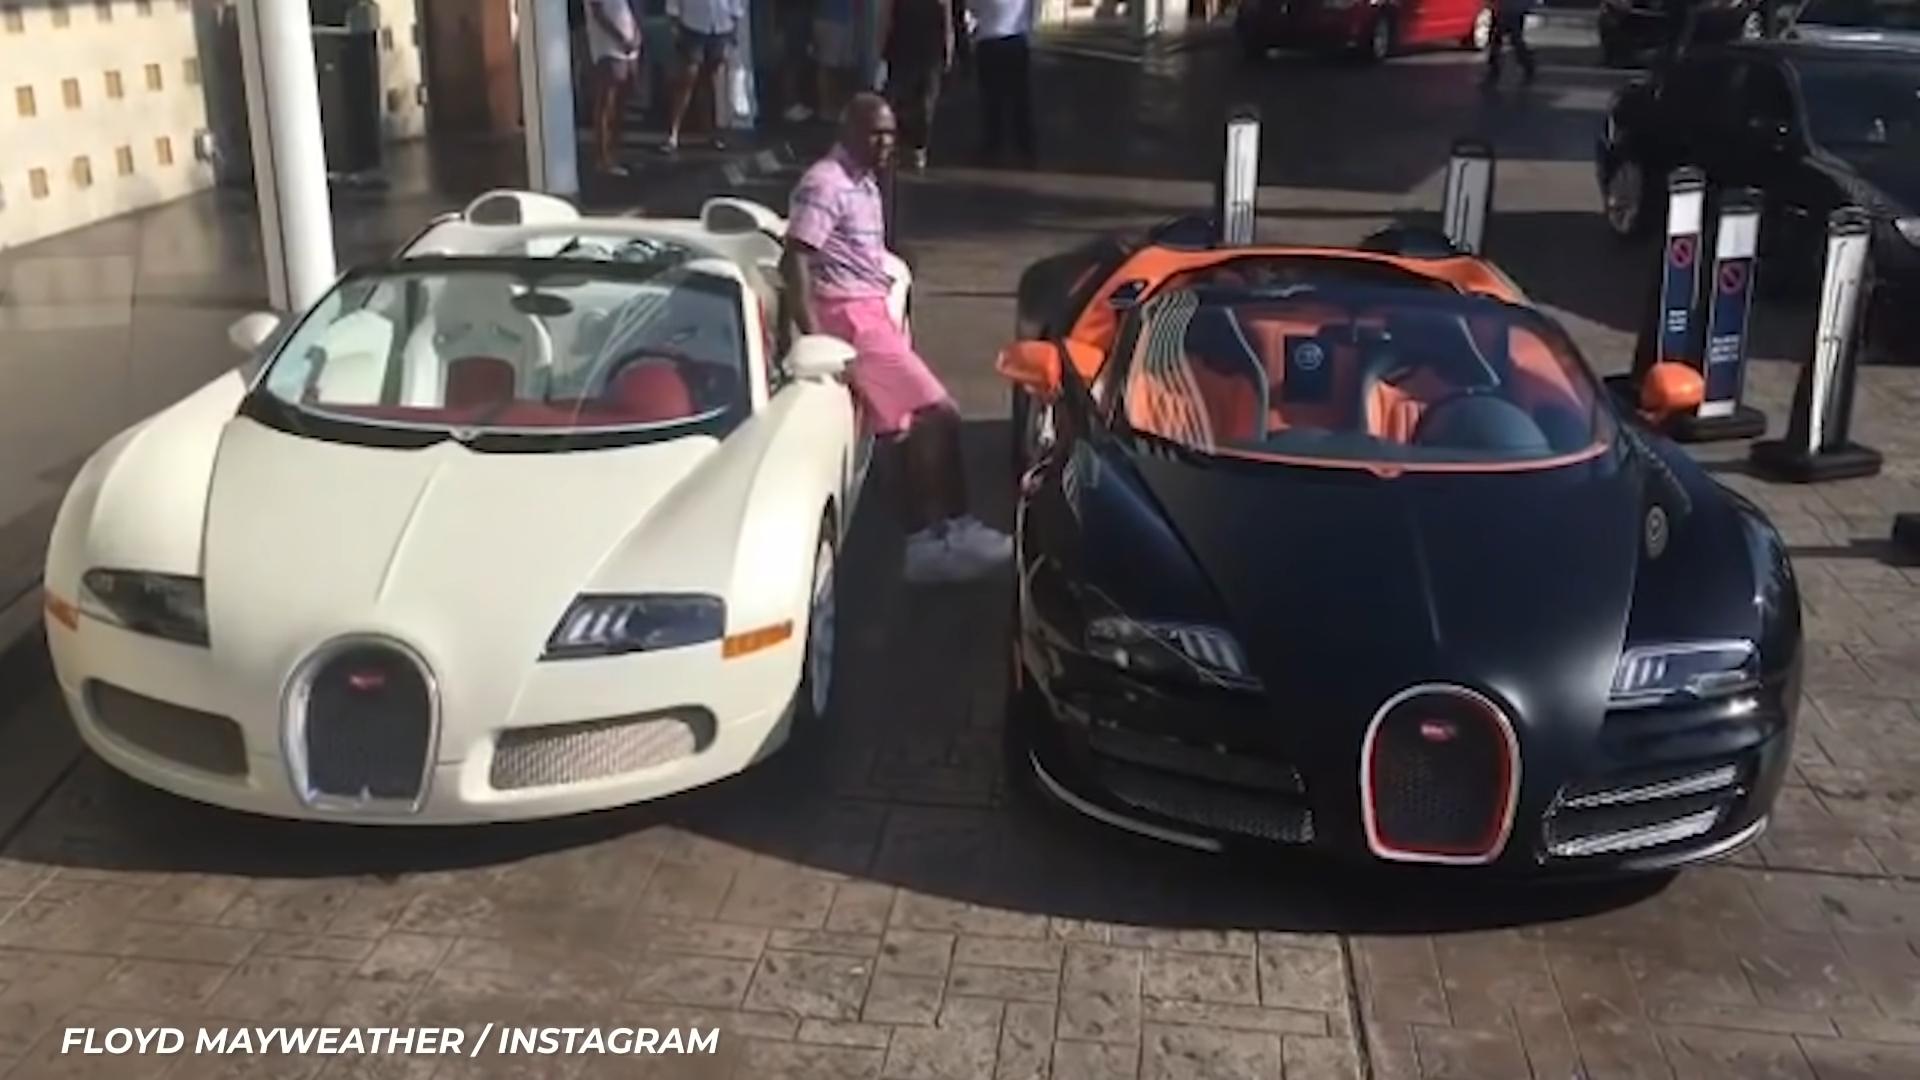 Floyd mayweather car collection